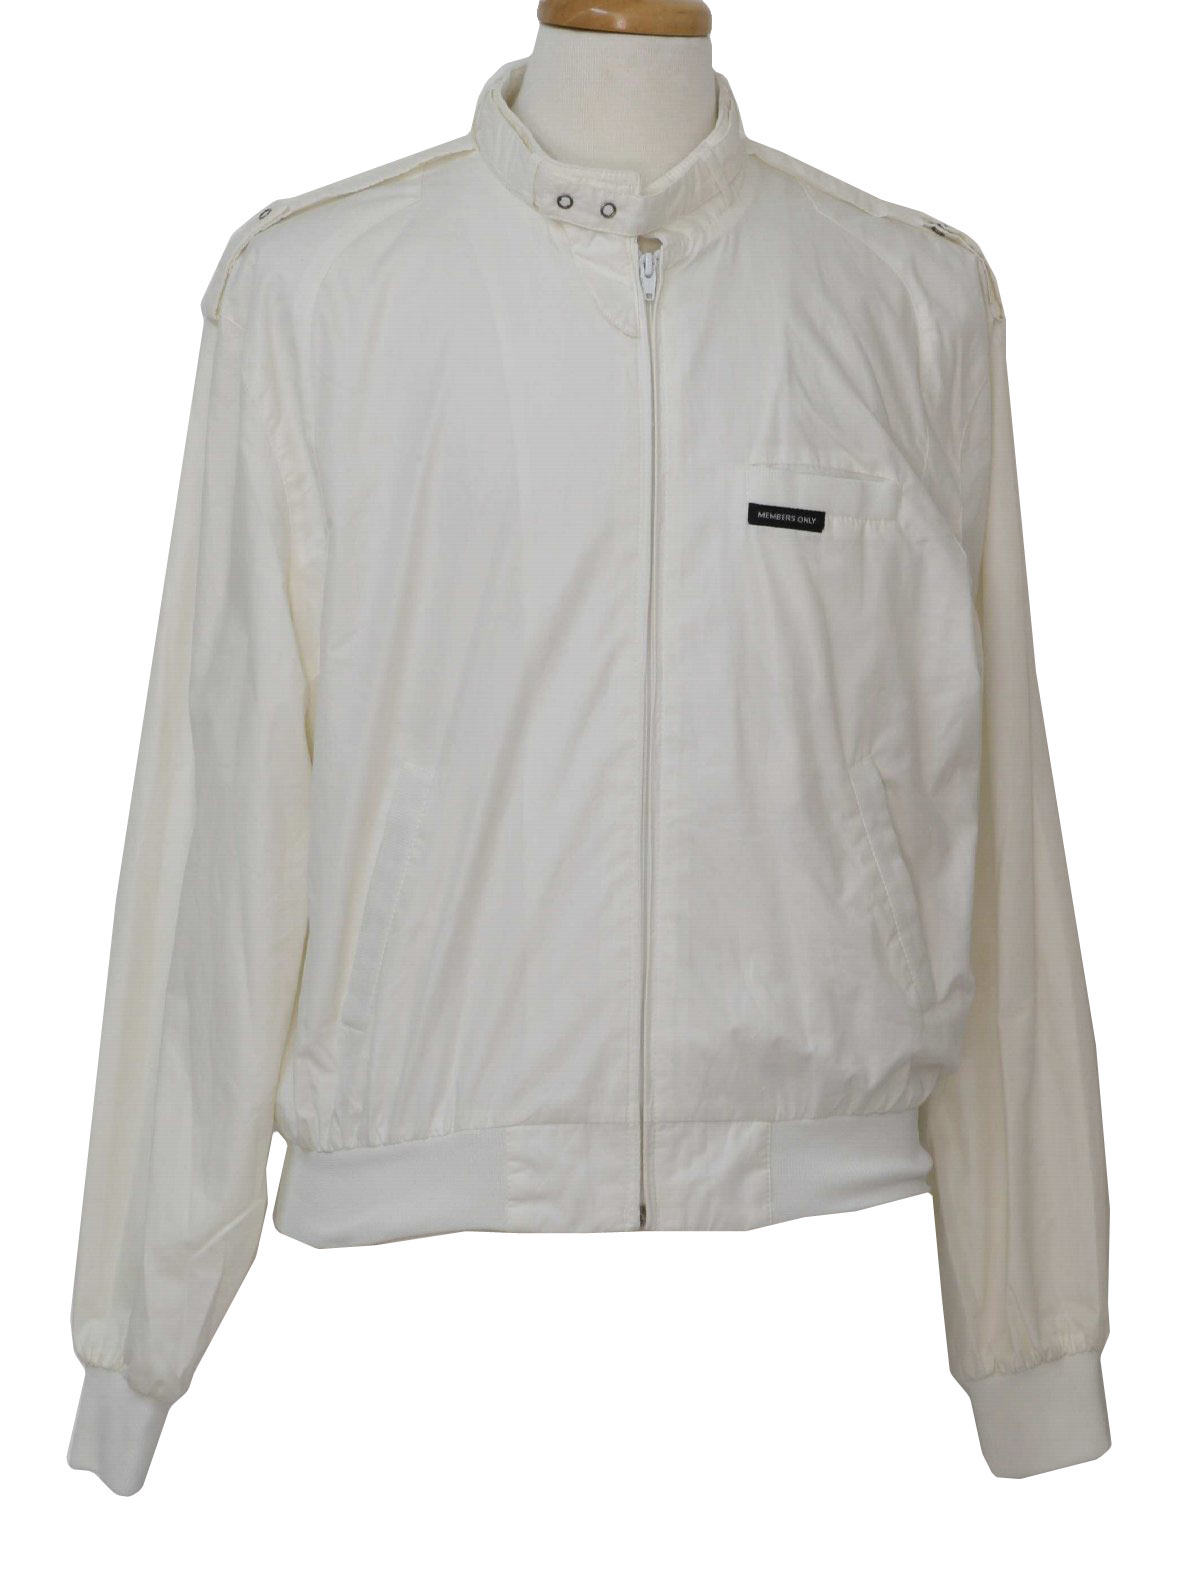 Vintage Members Only 1980s Jacket: 80s -Members Only- Mens white front ...